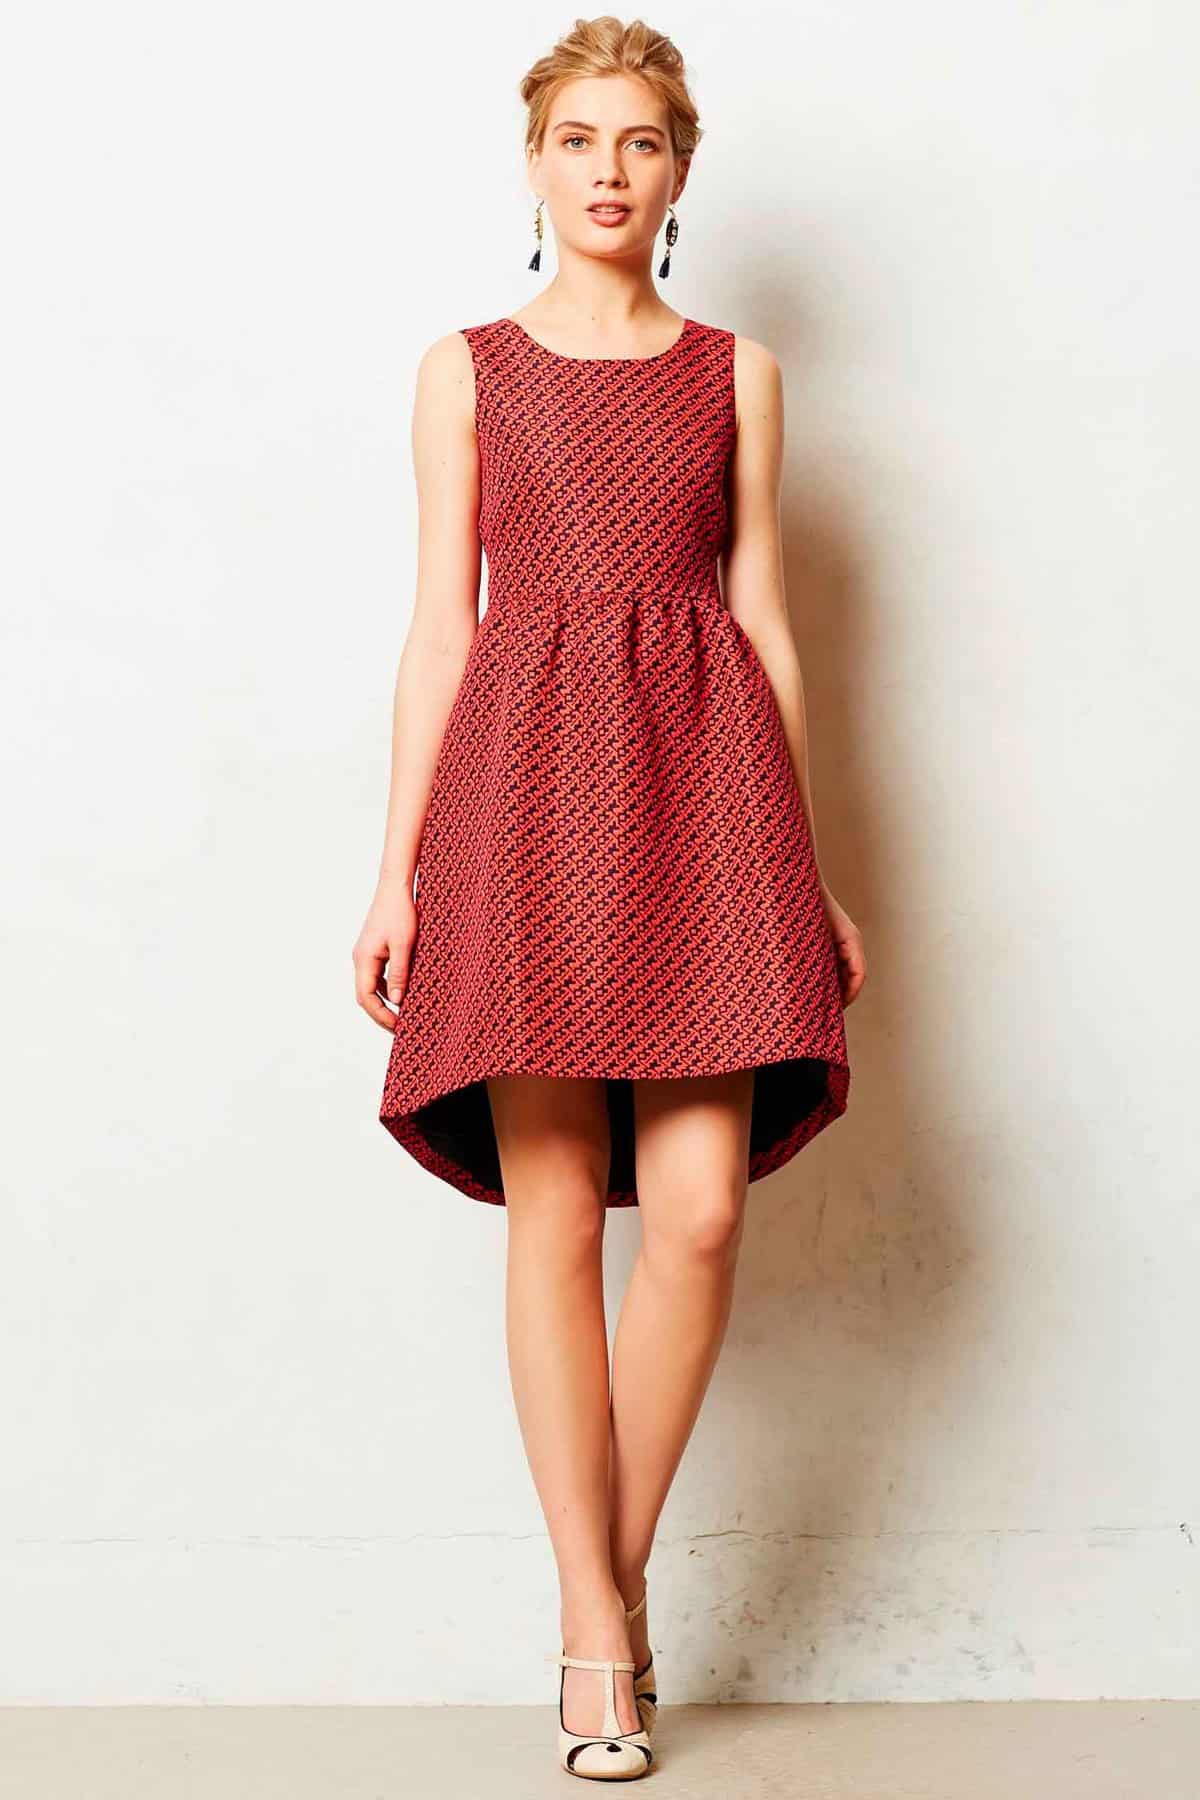 anthropologie-red-geo-jacquard-dress-product-1-16607146-1-223324407-normal